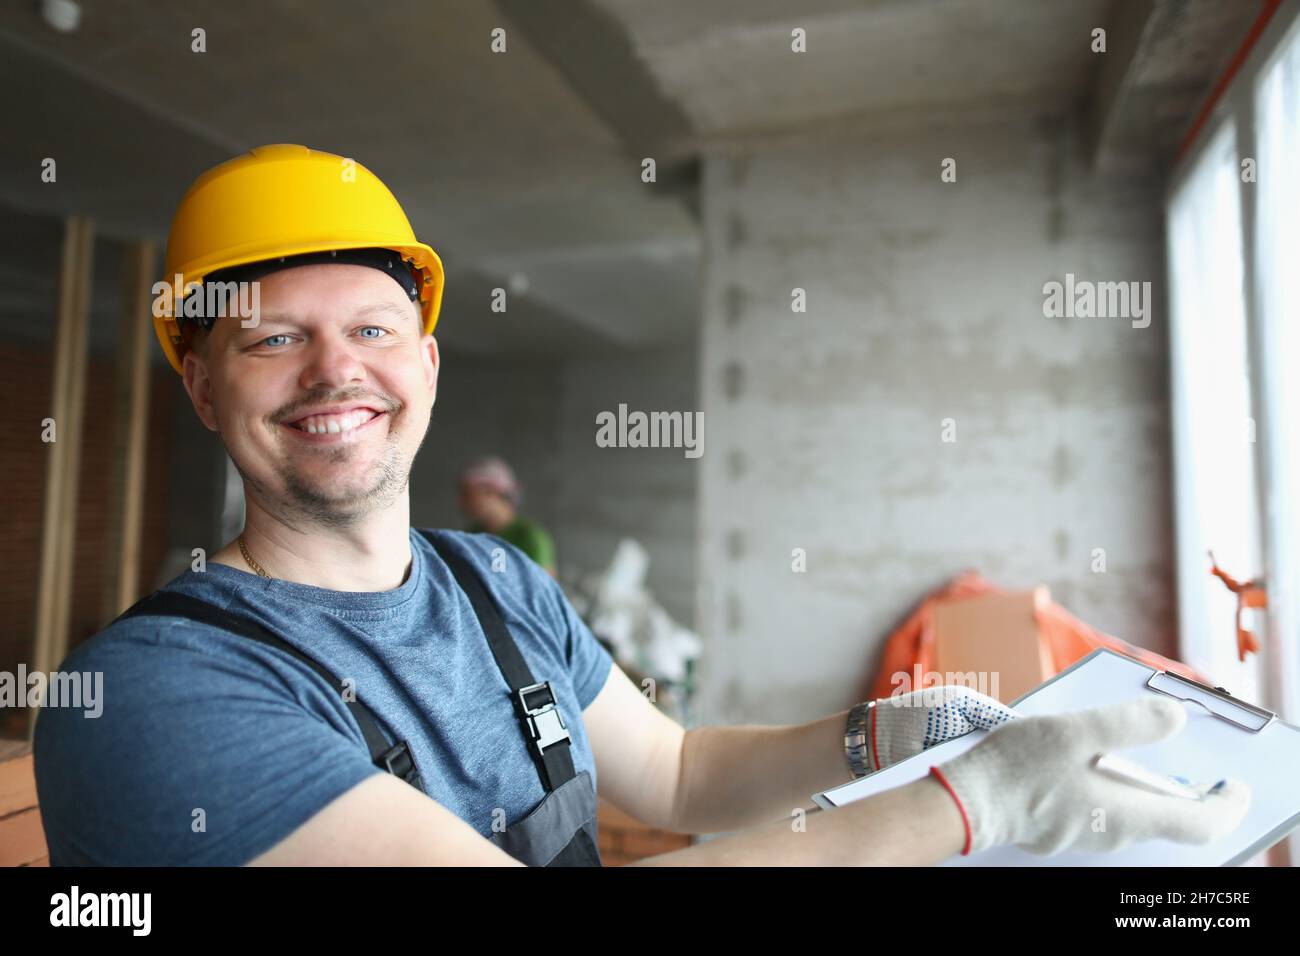 Smiling professional worker hold clipboard with document on house purchase Stock Photo